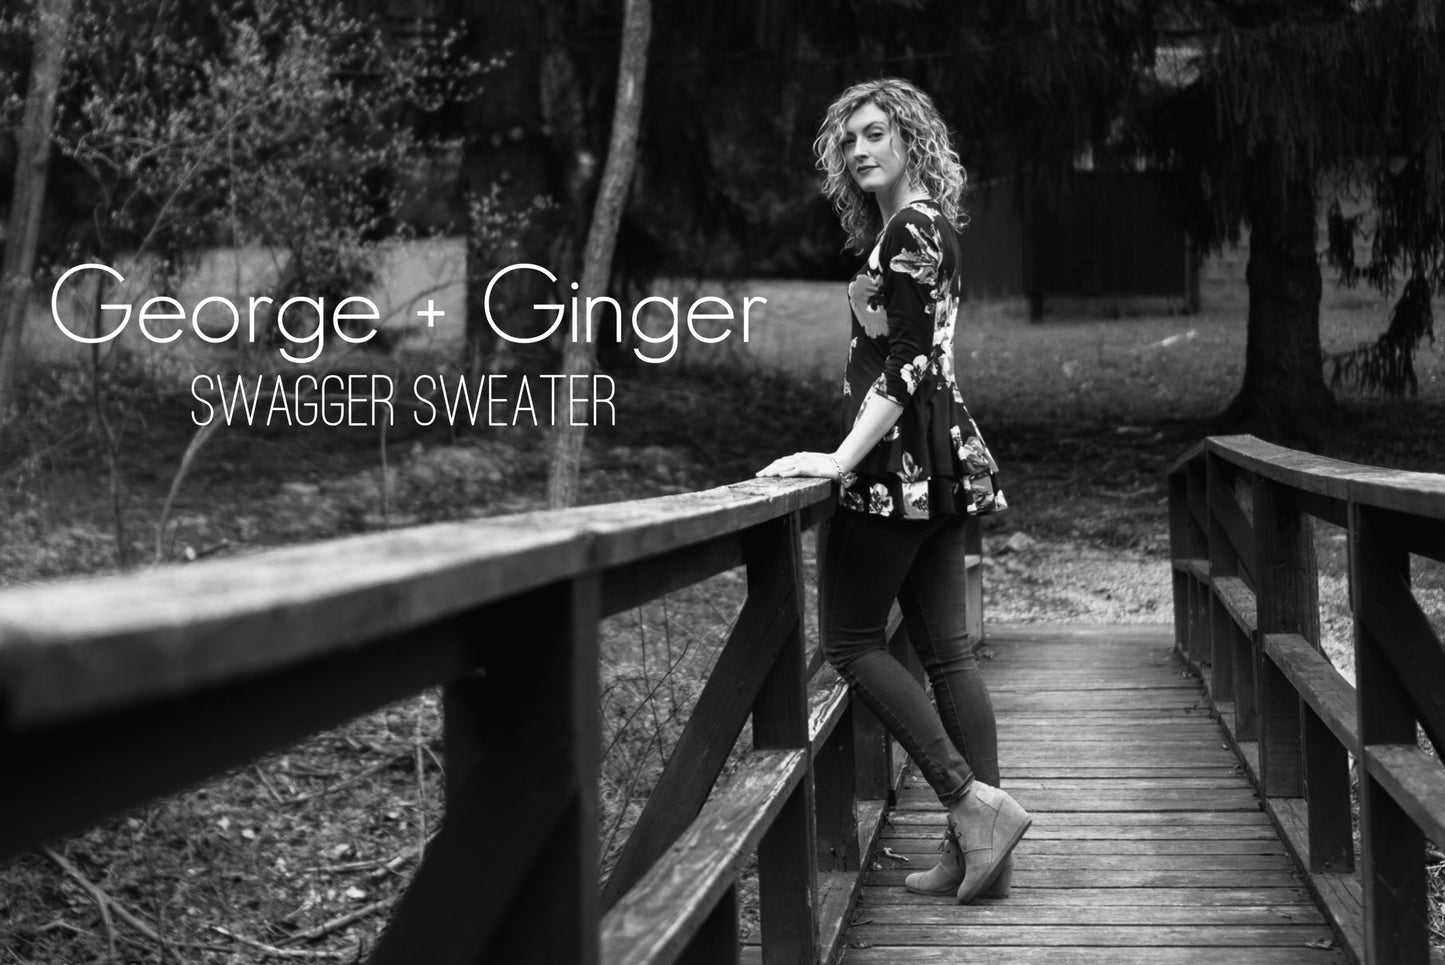 The Swagger Sweater PDF Sewing Pattern